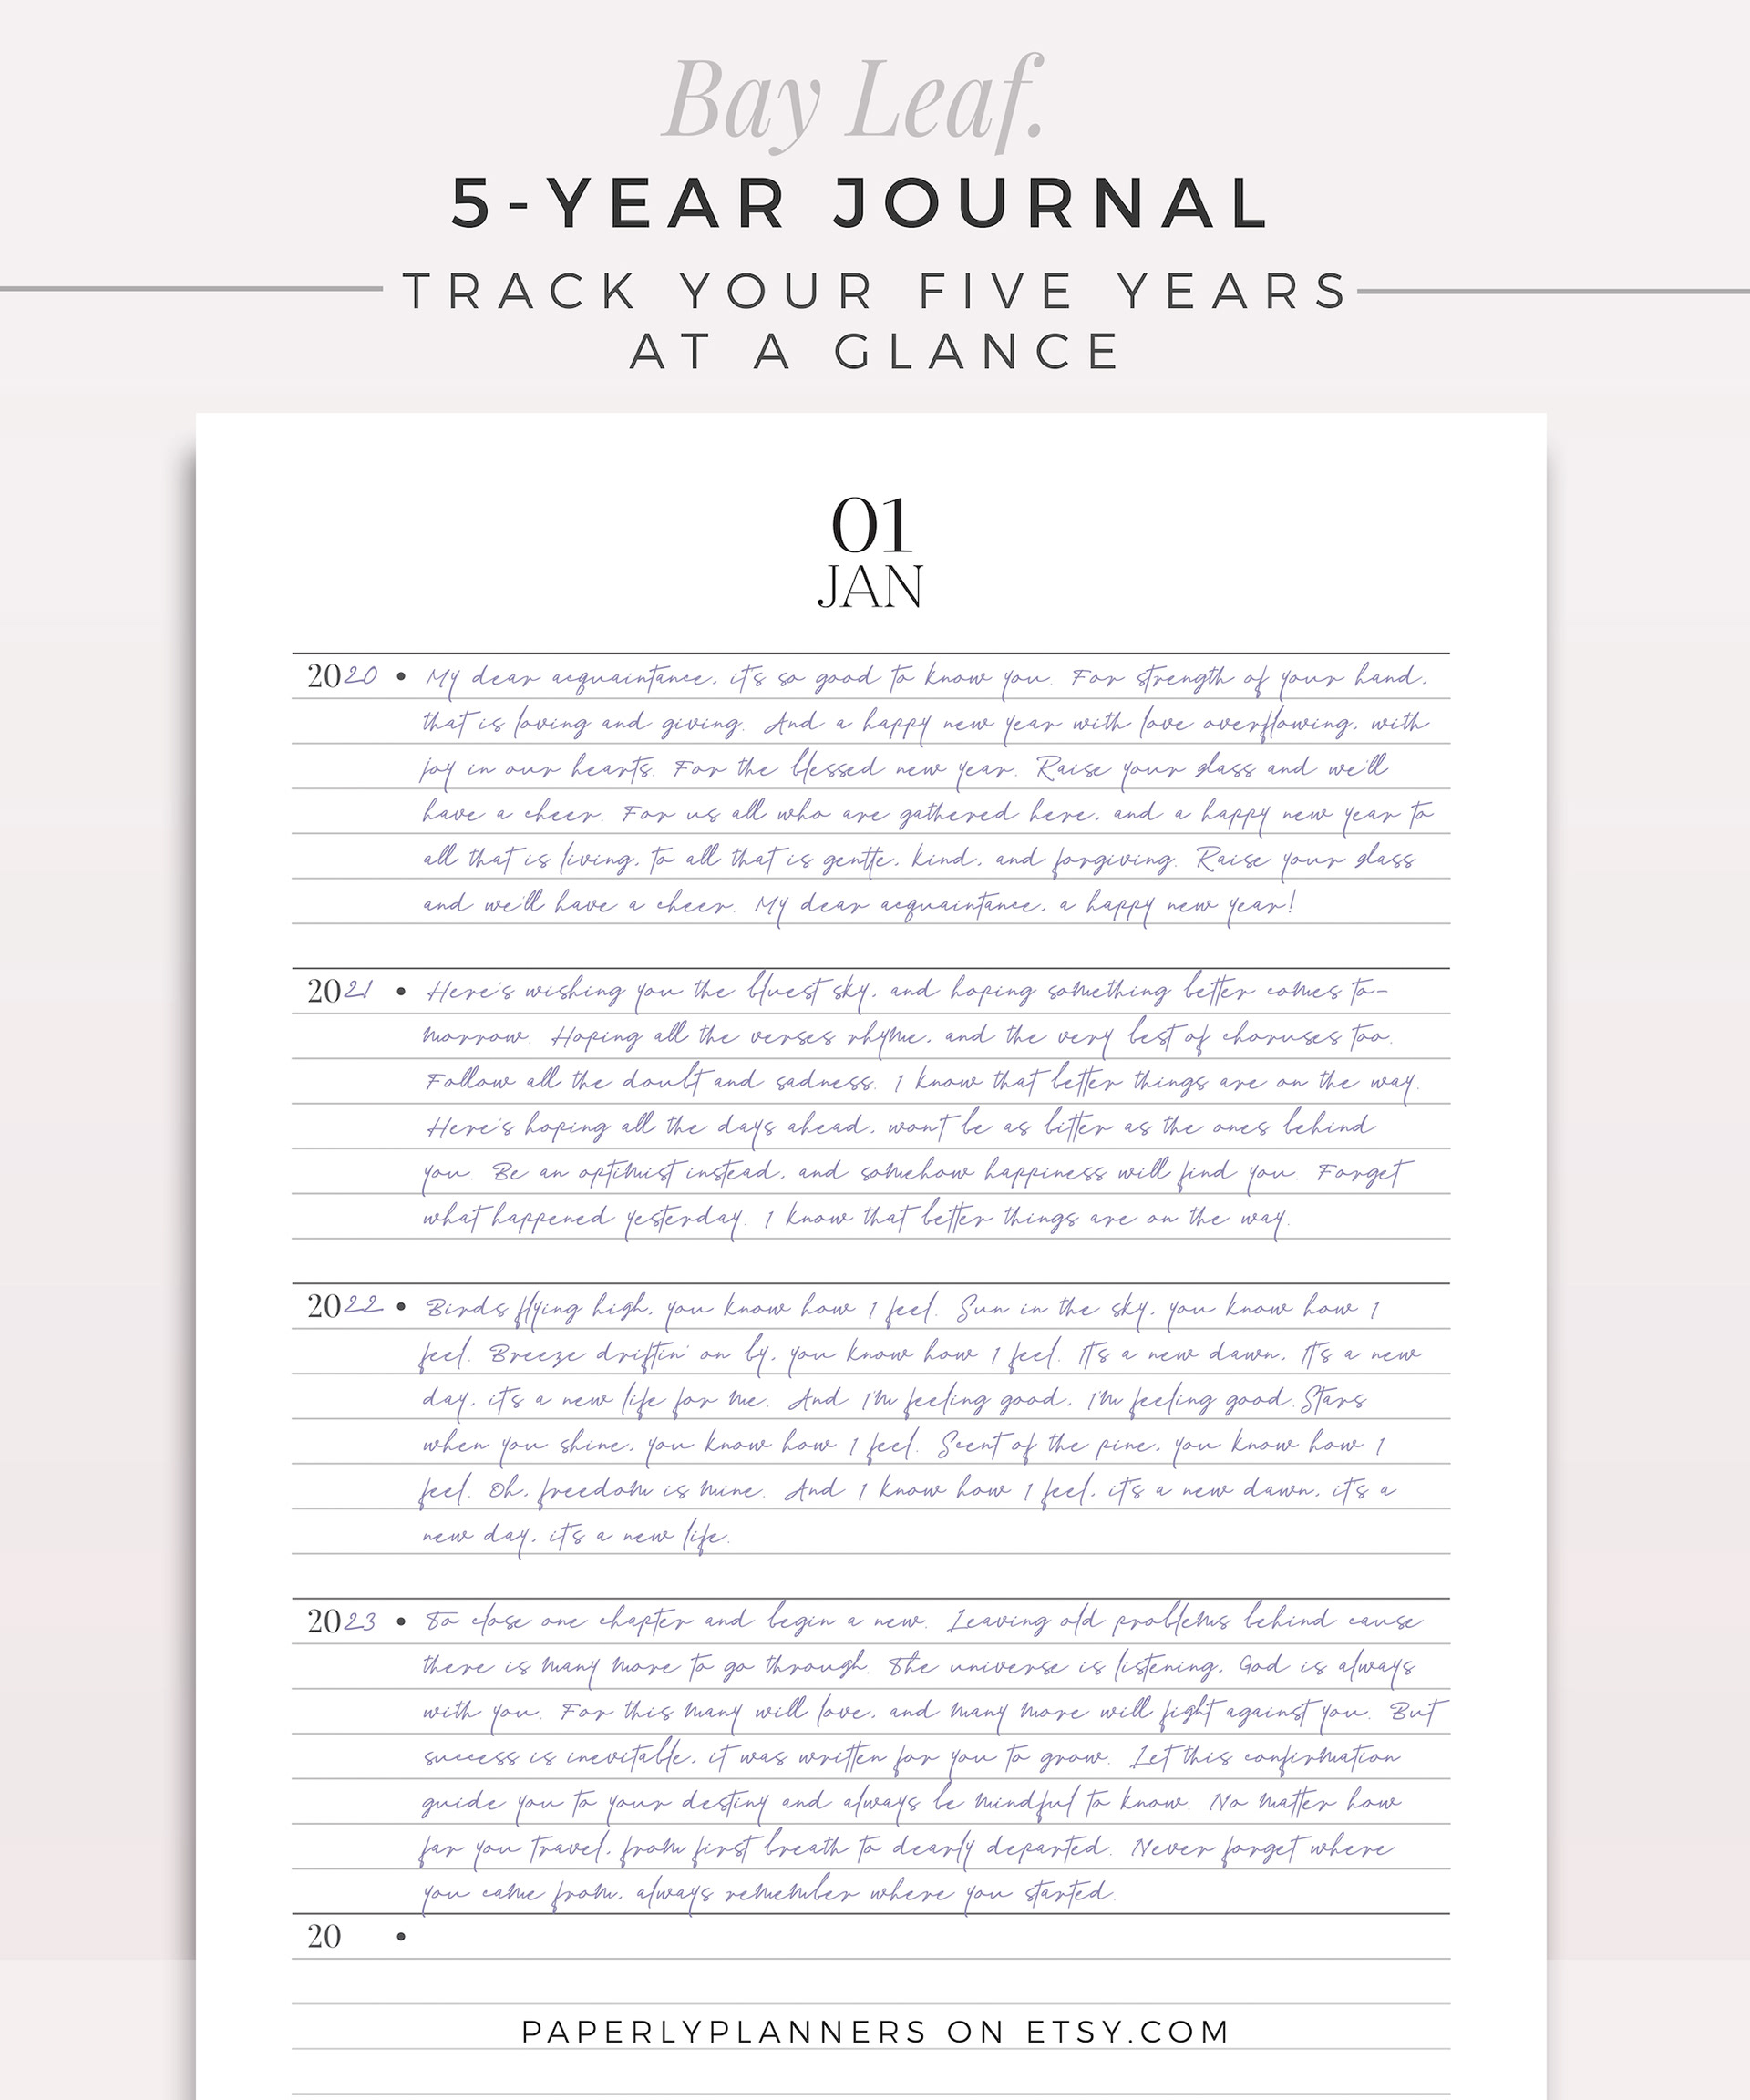 Paperly Planners - Beautiful, Productive. - BAY LEAF 5-Year Journal